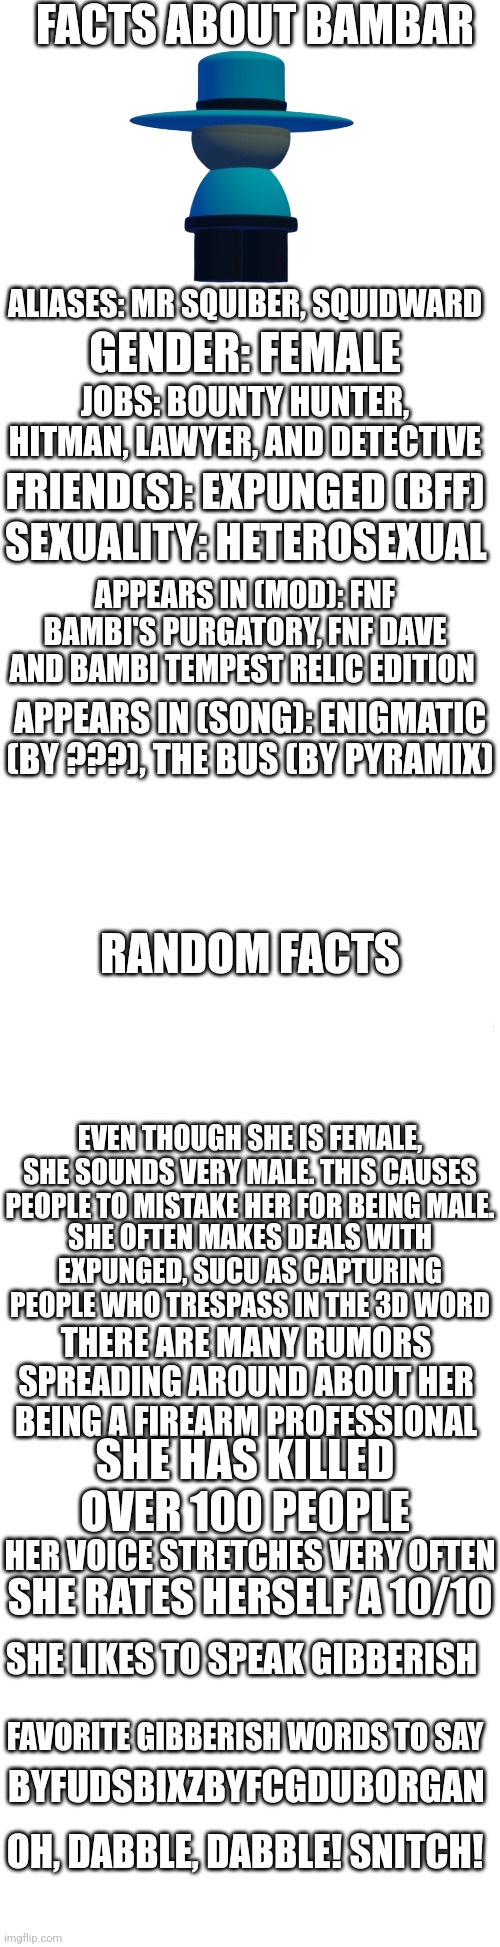 When a meme knows more information than the Wikipedia | FACTS ABOUT BAMBAR; ALIASES: MR SQUIBER, SQUIDWARD; GENDER: FEMALE; JOBS: BOUNTY HUNTER, HITMAN, LAWYER, AND DETECTIVE; FRIEND(S): EXPUNGED (BFF); SEXUALITY: HETEROSEXUAL; APPEARS IN (MOD): FNF BAMBI'S PURGATORY, FNF DAVE AND BAMBI TEMPEST RELIC EDITION; APPEARS IN (SONG): ENIGMATIC (BY ???), THE BUS (BY PYRAMIX); RANDOM FACTS; EVEN THOUGH SHE IS FEMALE, SHE SOUNDS VERY MALE. THIS CAUSES PEOPLE TO MISTAKE HER FOR BEING MALE. SHE OFTEN MAKES DEALS WITH EXPUNGED, SUCU AS CAPTURING PEOPLE WHO TRESPASS IN THE 3D WORD; THERE ARE MANY RUMORS SPREADING AROUND ABOUT HER BEING A FIREARM PROFESSIONAL; SHE HAS KILLED OVER 100 PEOPLE; HER VOICE STRETCHES VERY OFTEN; SHE RATES HERSELF A 10/10; SHE LIKES TO SPEAK GIBBERISH; FAVORITE GIBBERISH WORDS TO SAY; BYFUDSBIXZBYFCGDUBORGAN; OH, DABBLE, DABBLE! SNITCH! | image tagged in wikipedia,information,dave and bambi,bambar,bambis purgatory | made w/ Imgflip meme maker